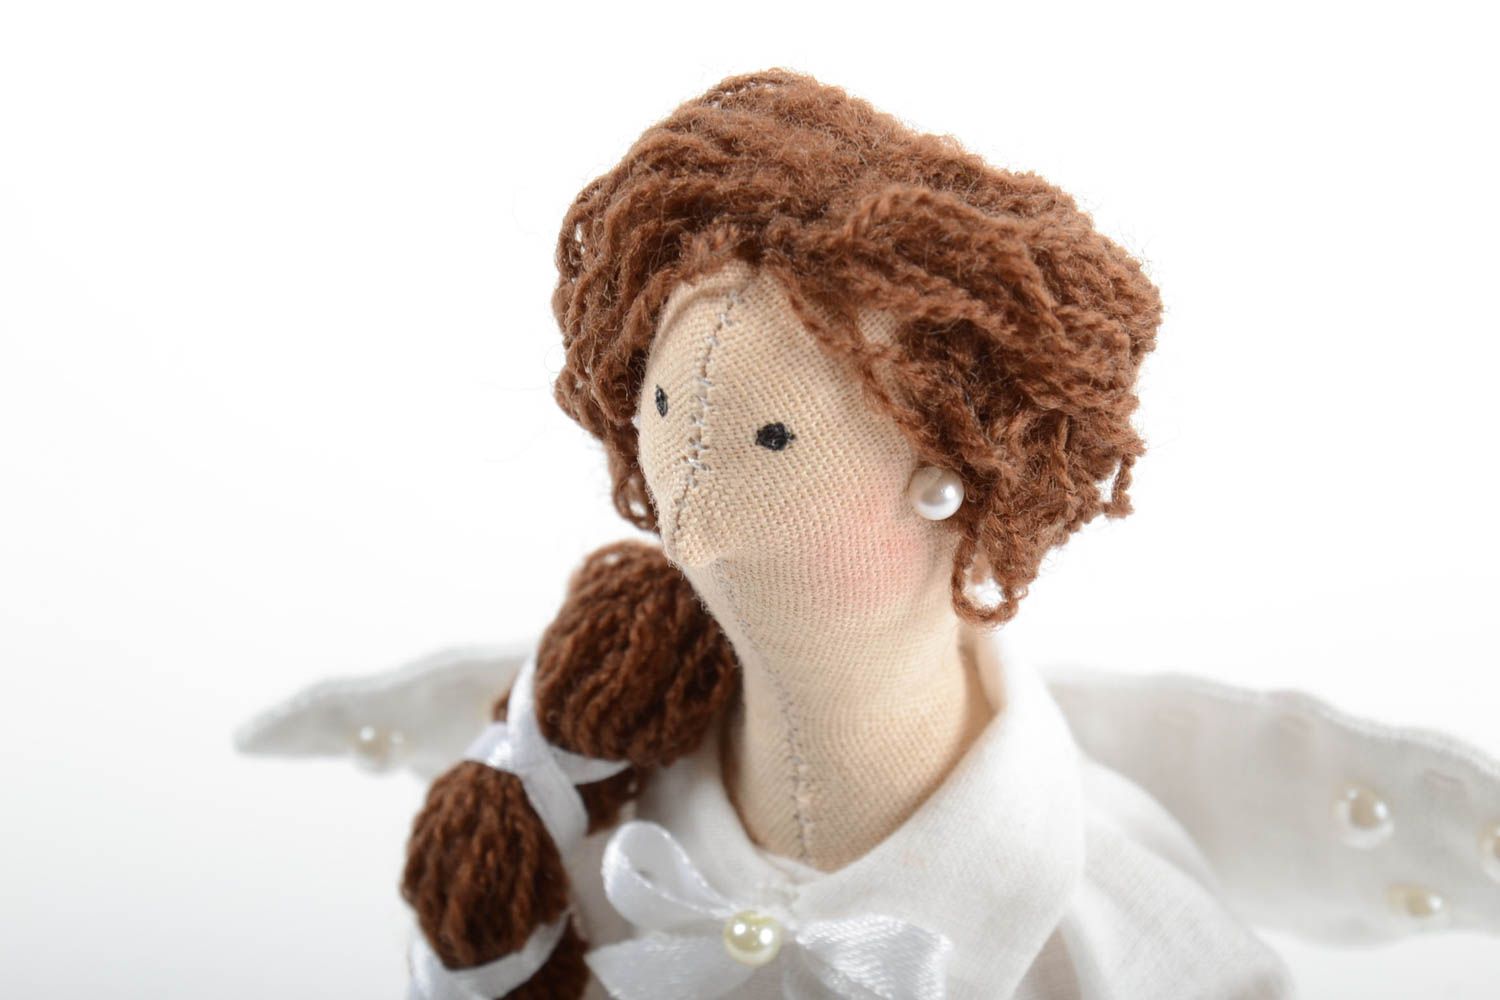 Beautiful handmade interior fabric doll decorative soft toy gifts for her photo 5